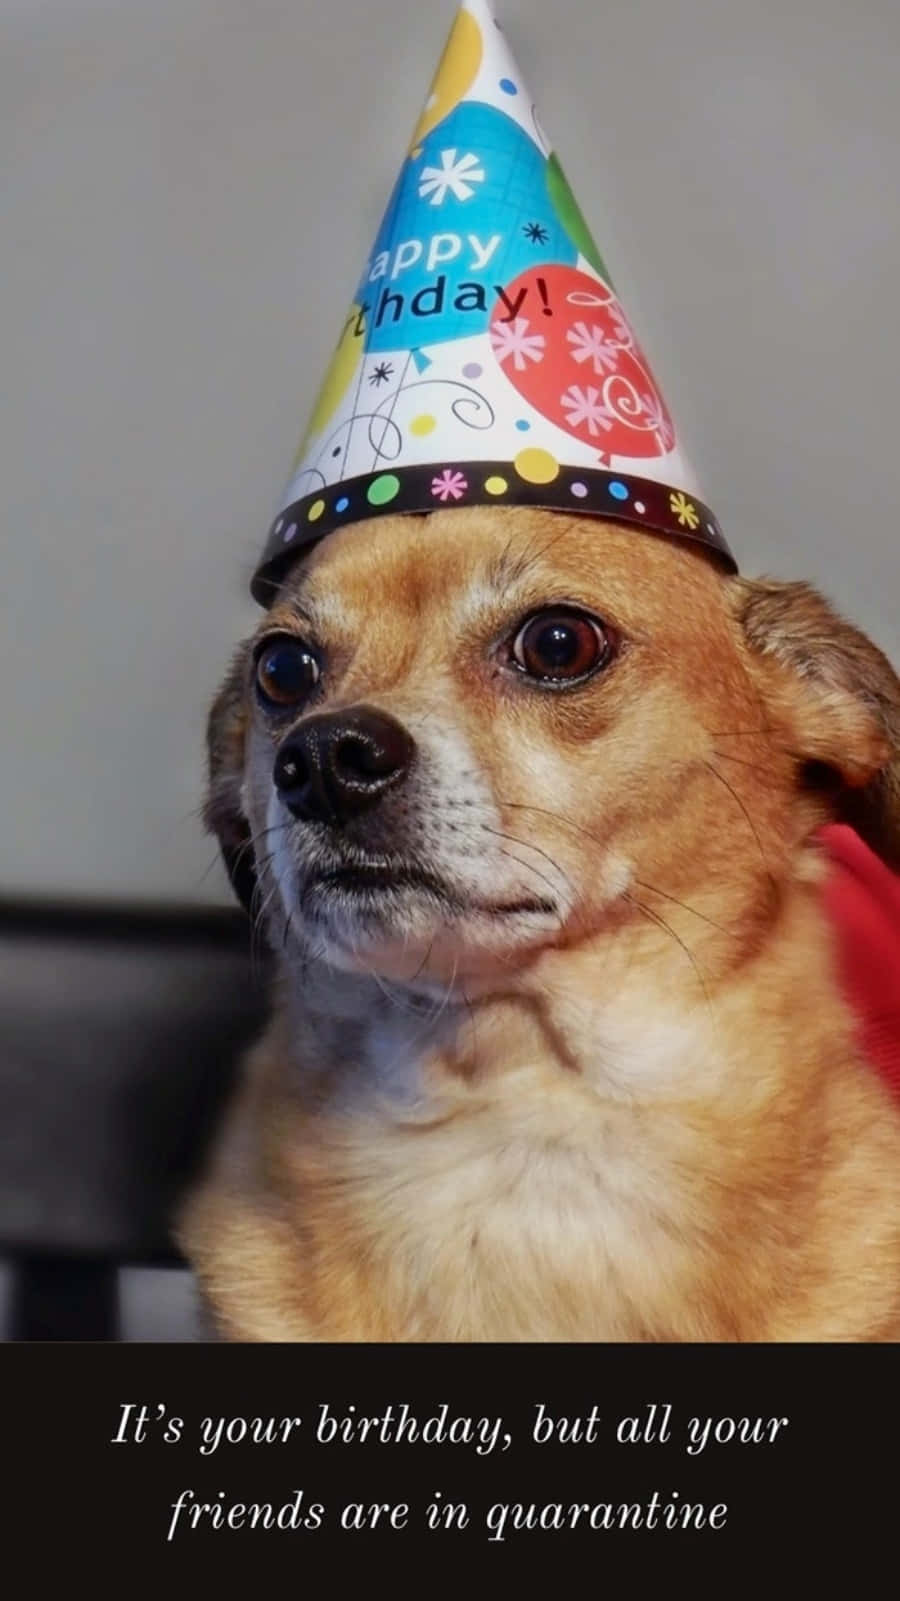 Dog Cute Party Hat Meme Pictures